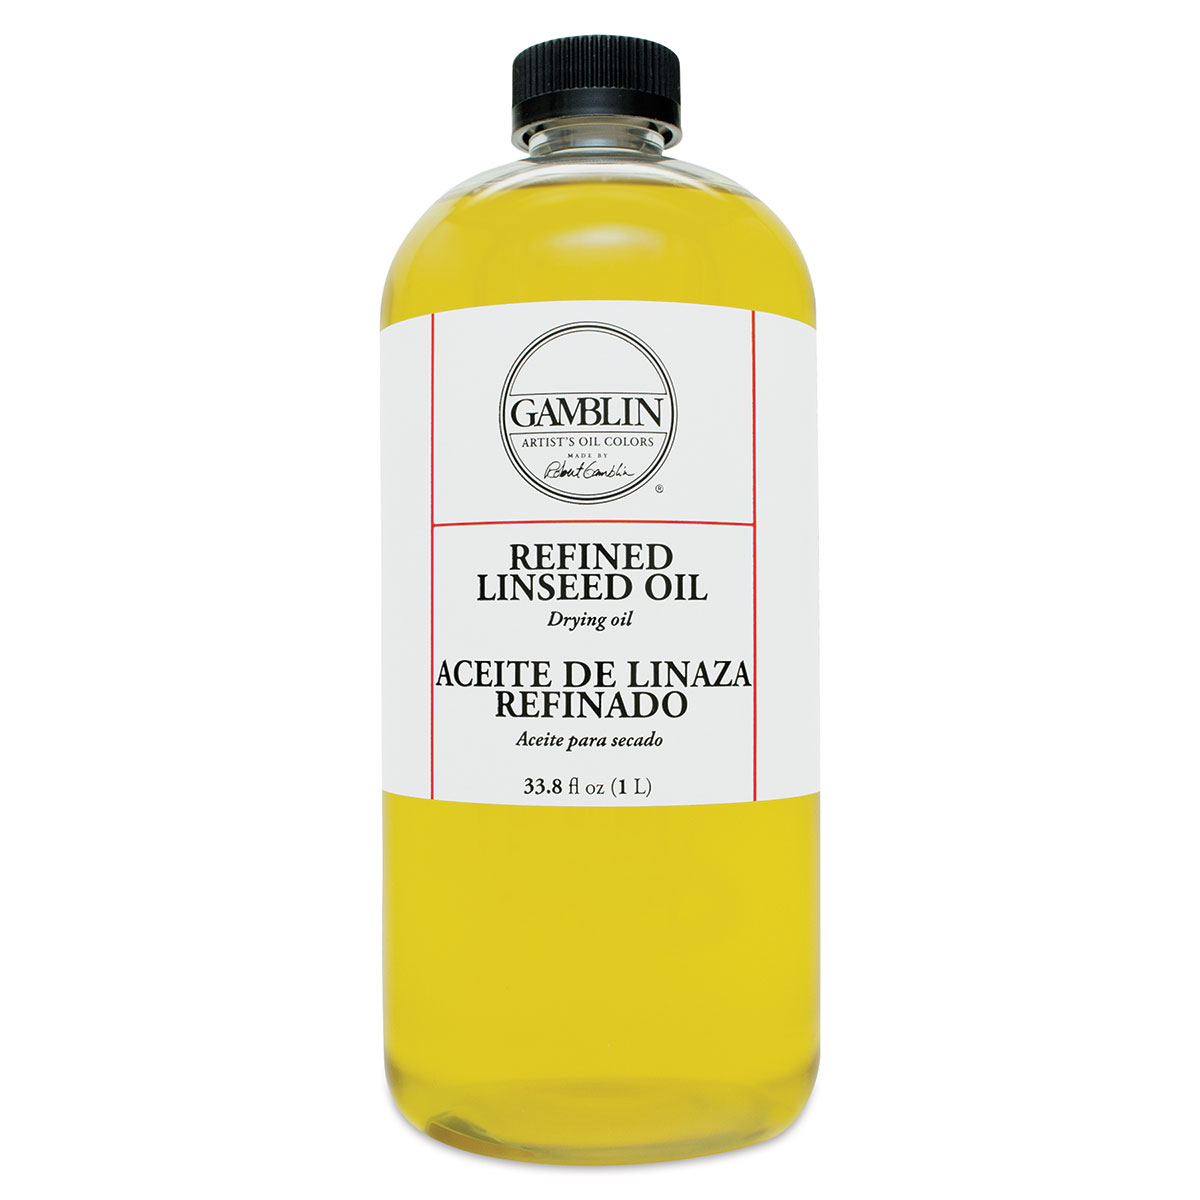 Gamblin Refined Linseed Oil - Judsons Art Outfitters